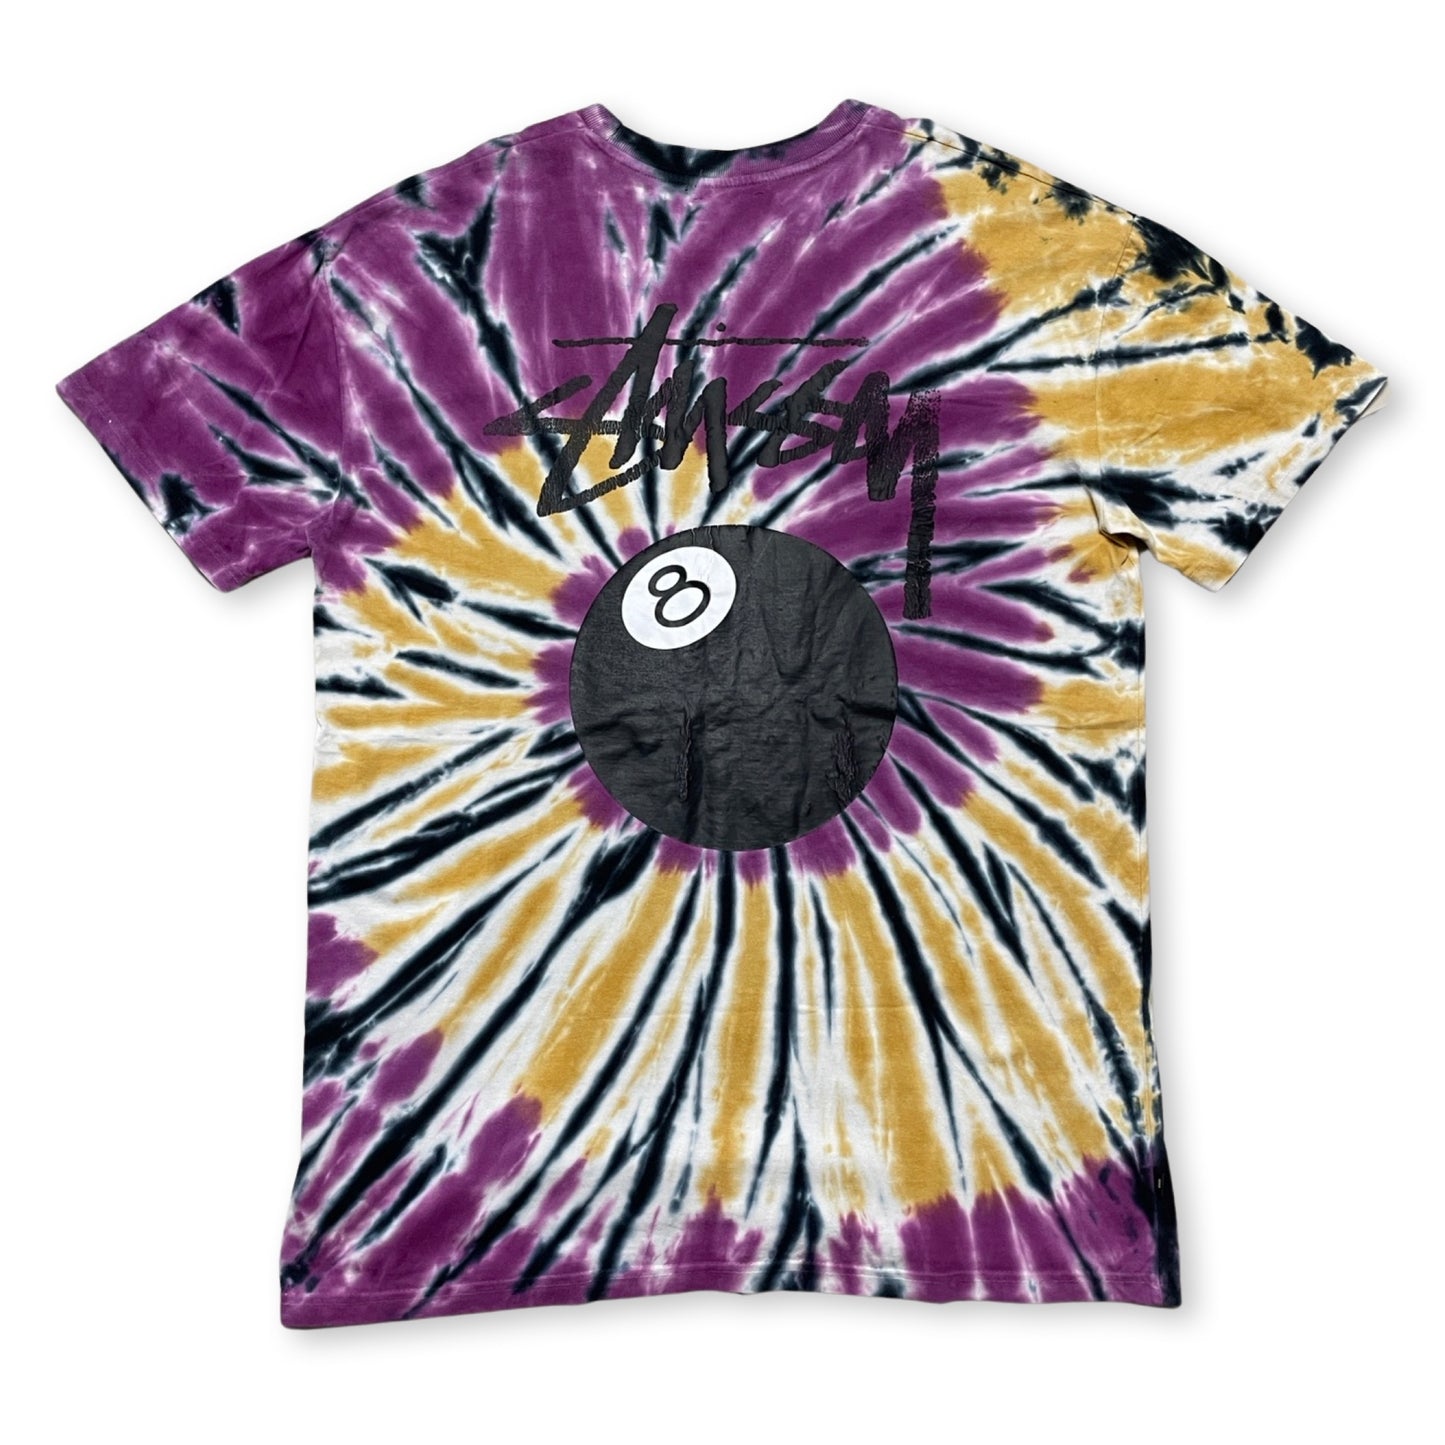 Stussy Dyed Tee (Large) 1 pinhole - non noticeable